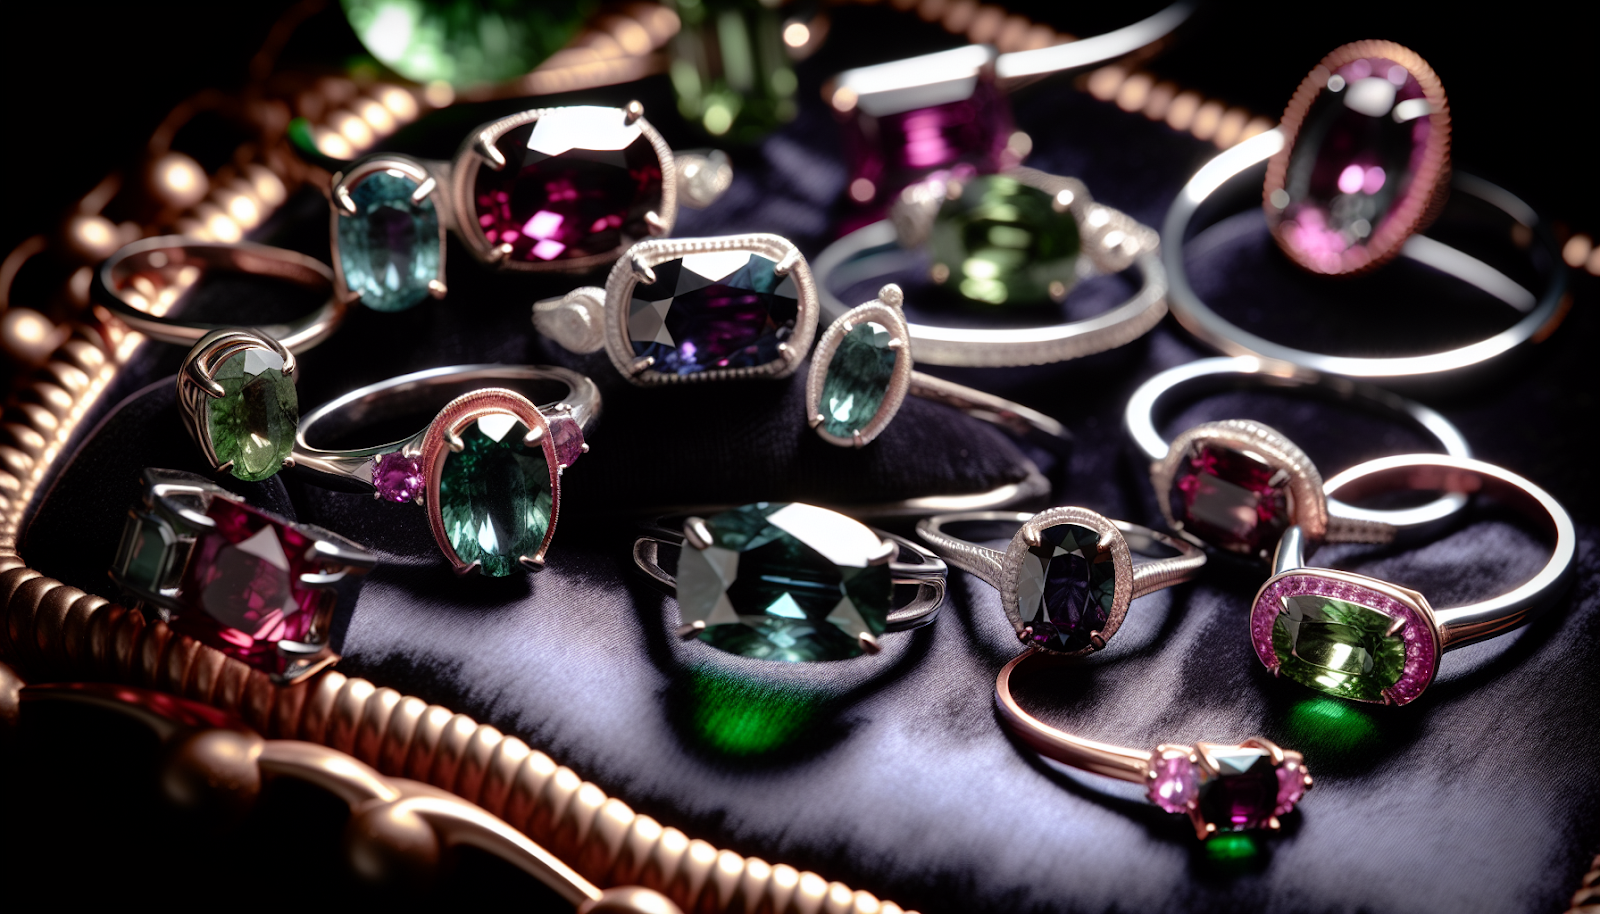 Exquisite alexandrite gemstone jewelry including rings, pendants, and bracelets